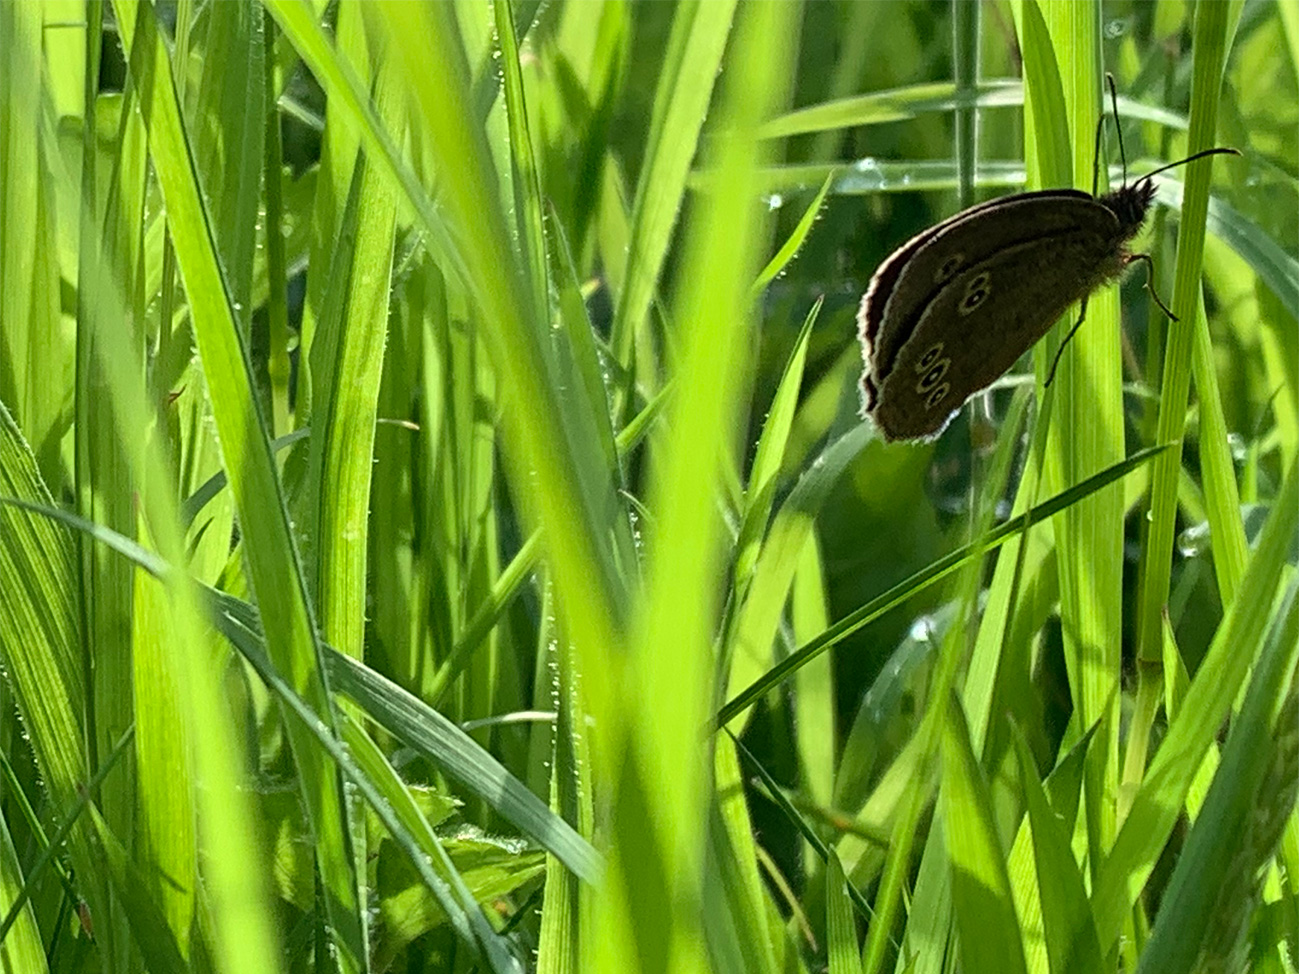 Ringlet butterfly in grass, Staffordshire UK